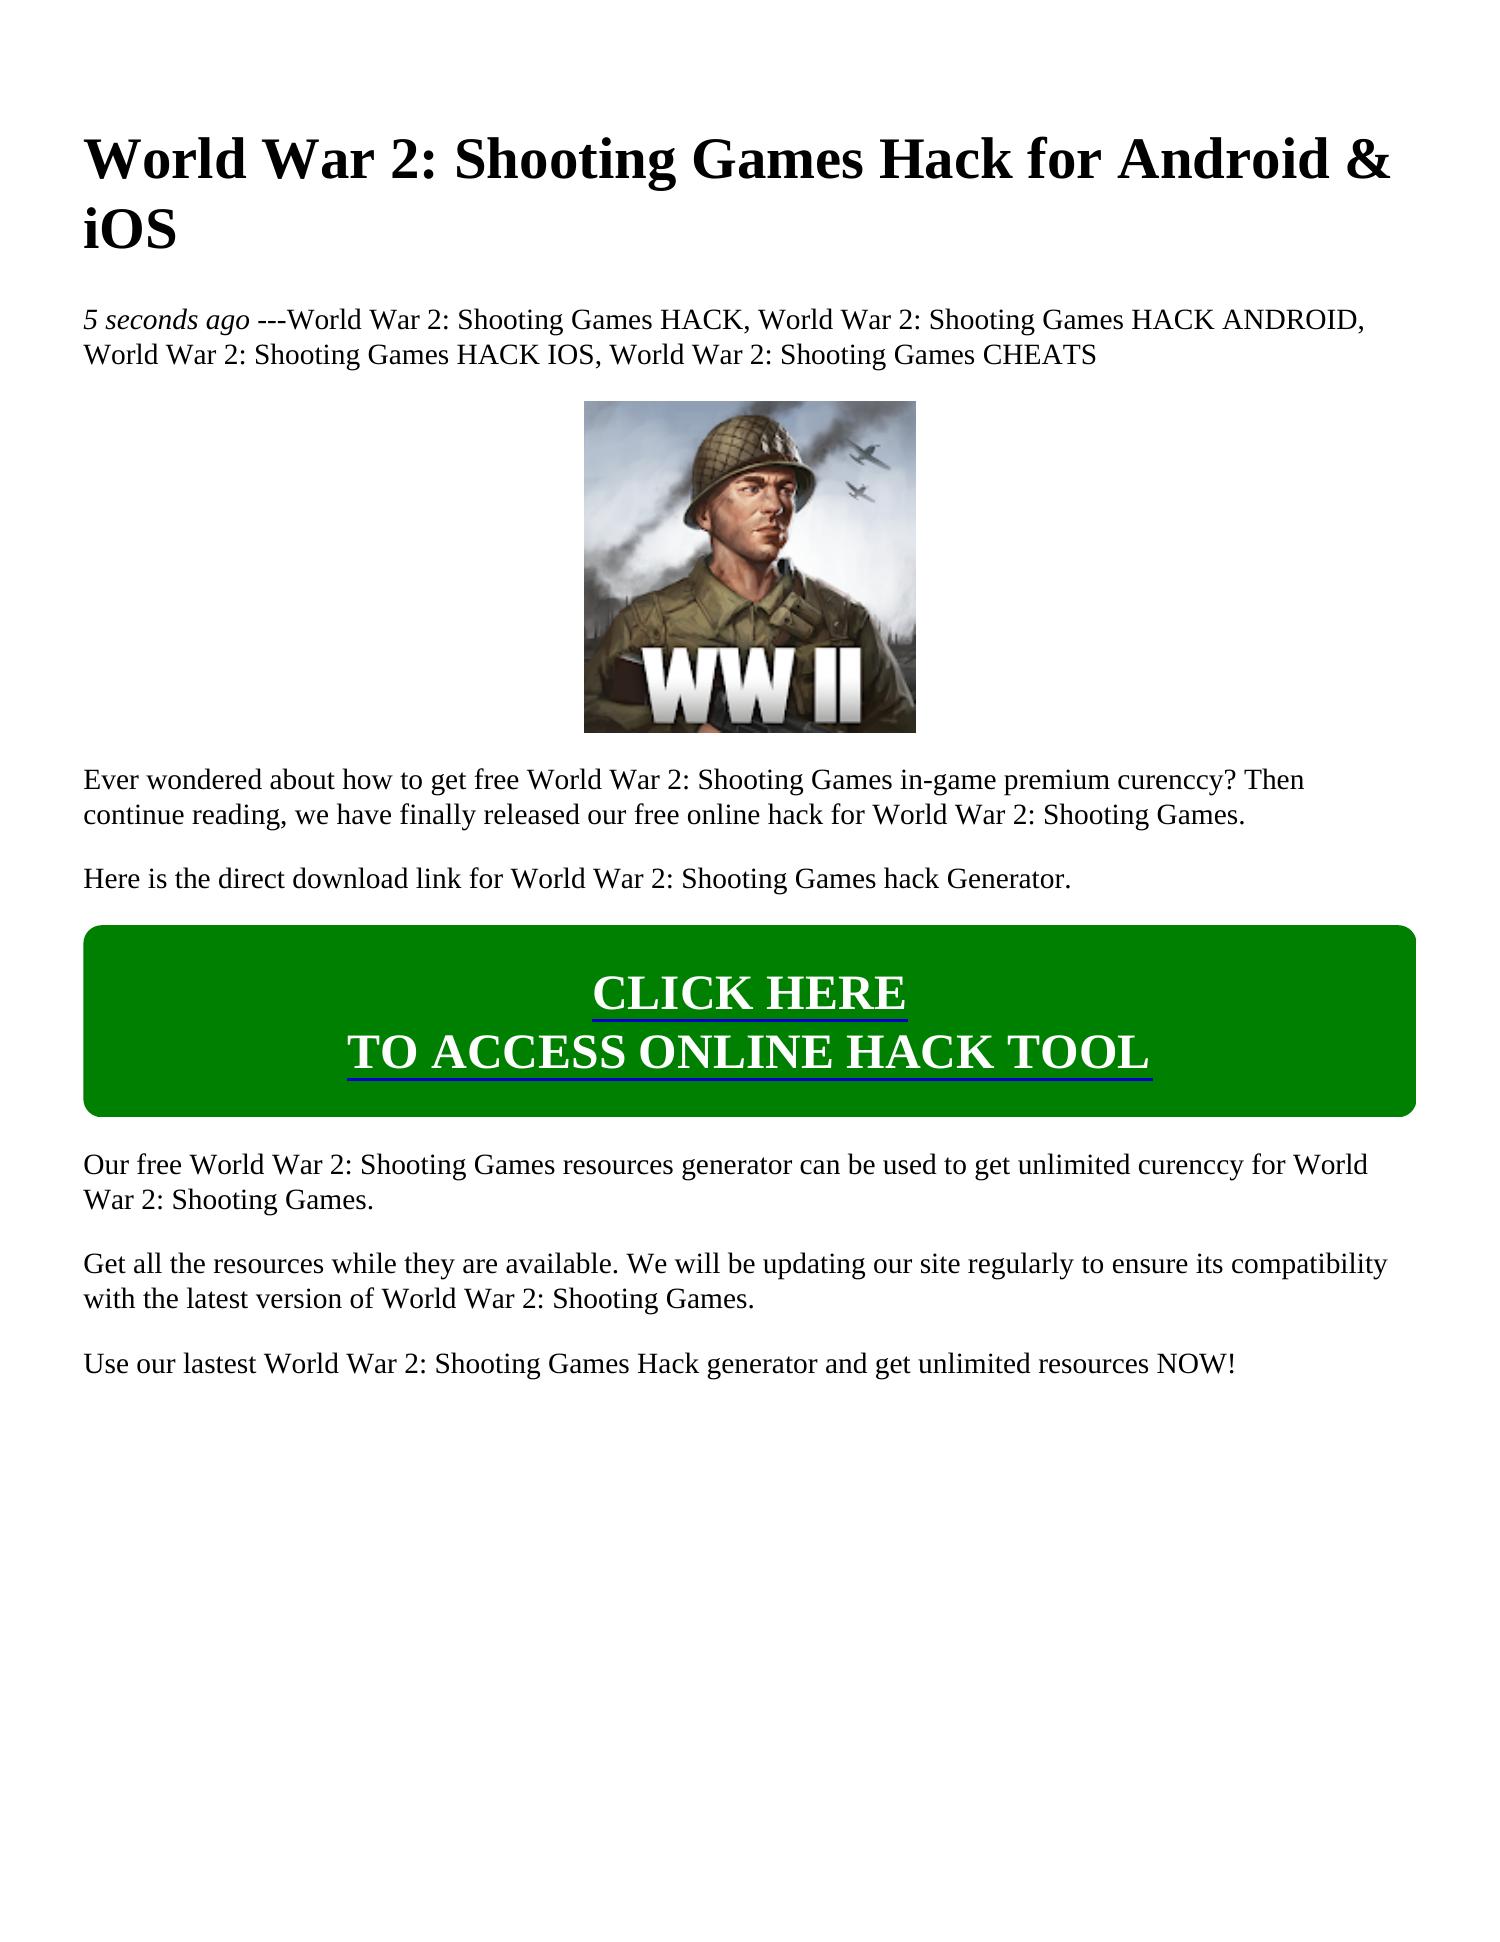 World War 2 Shooting Games Hack Android iOS.pdf DocDroid